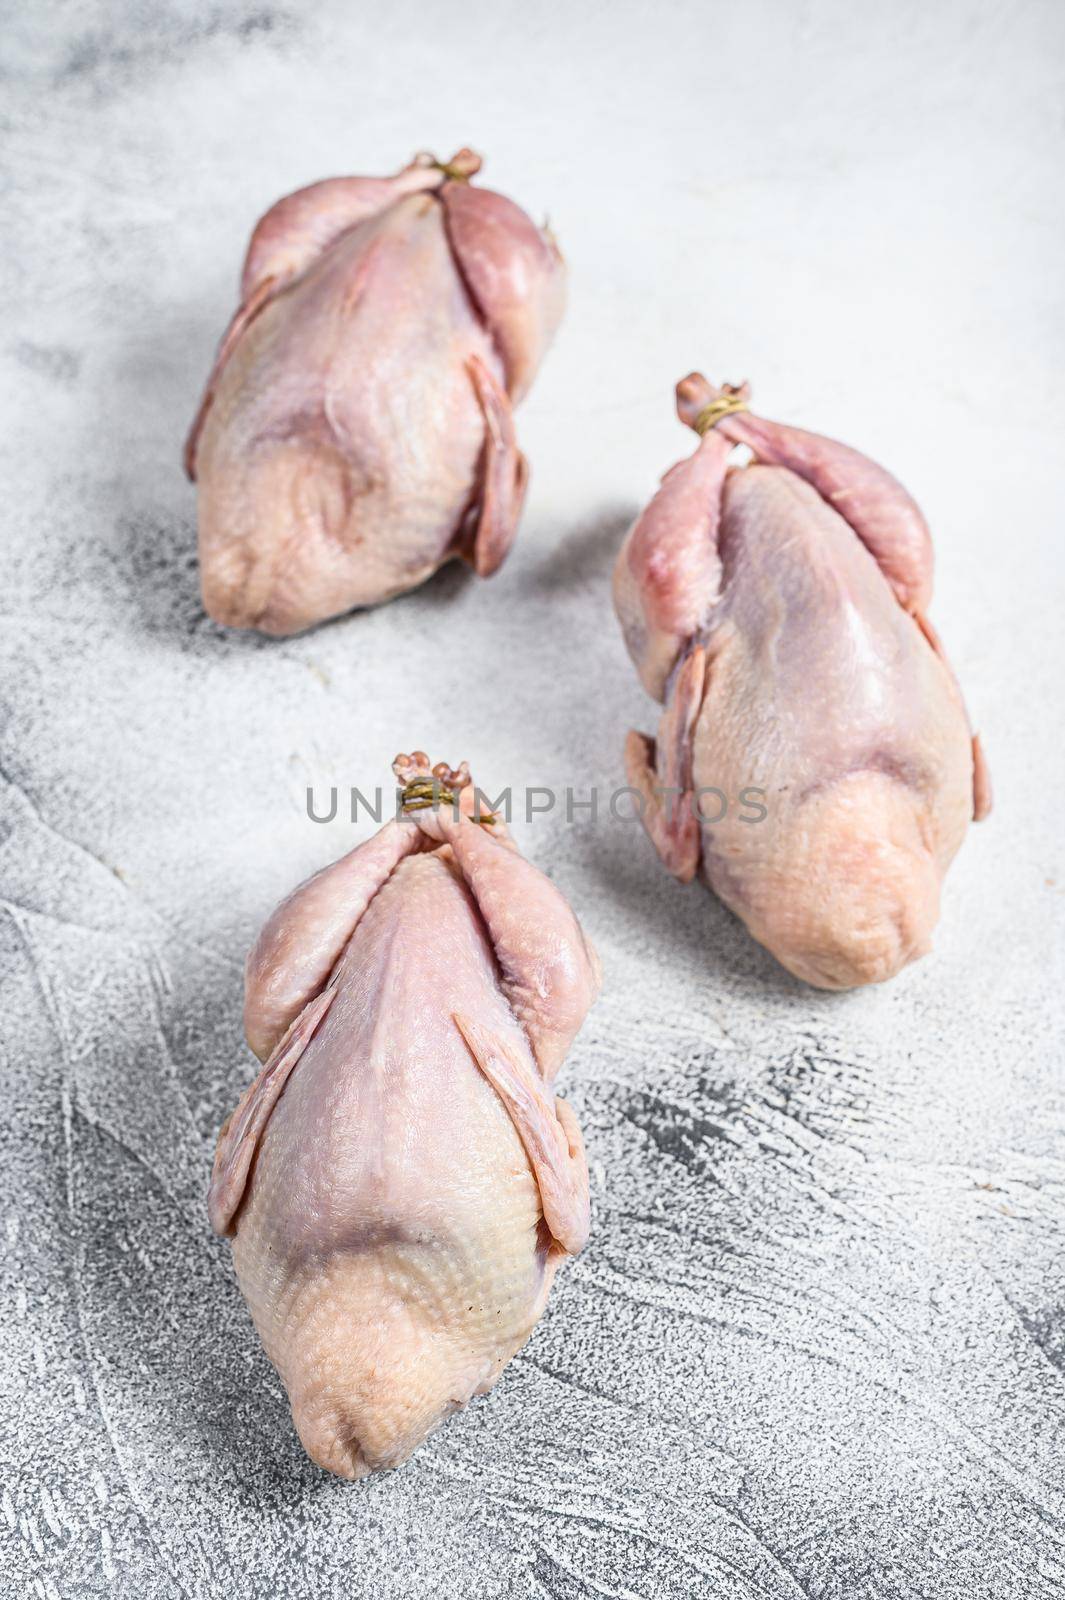 Raw quails on a kitchen table. White background. Top view by Composter